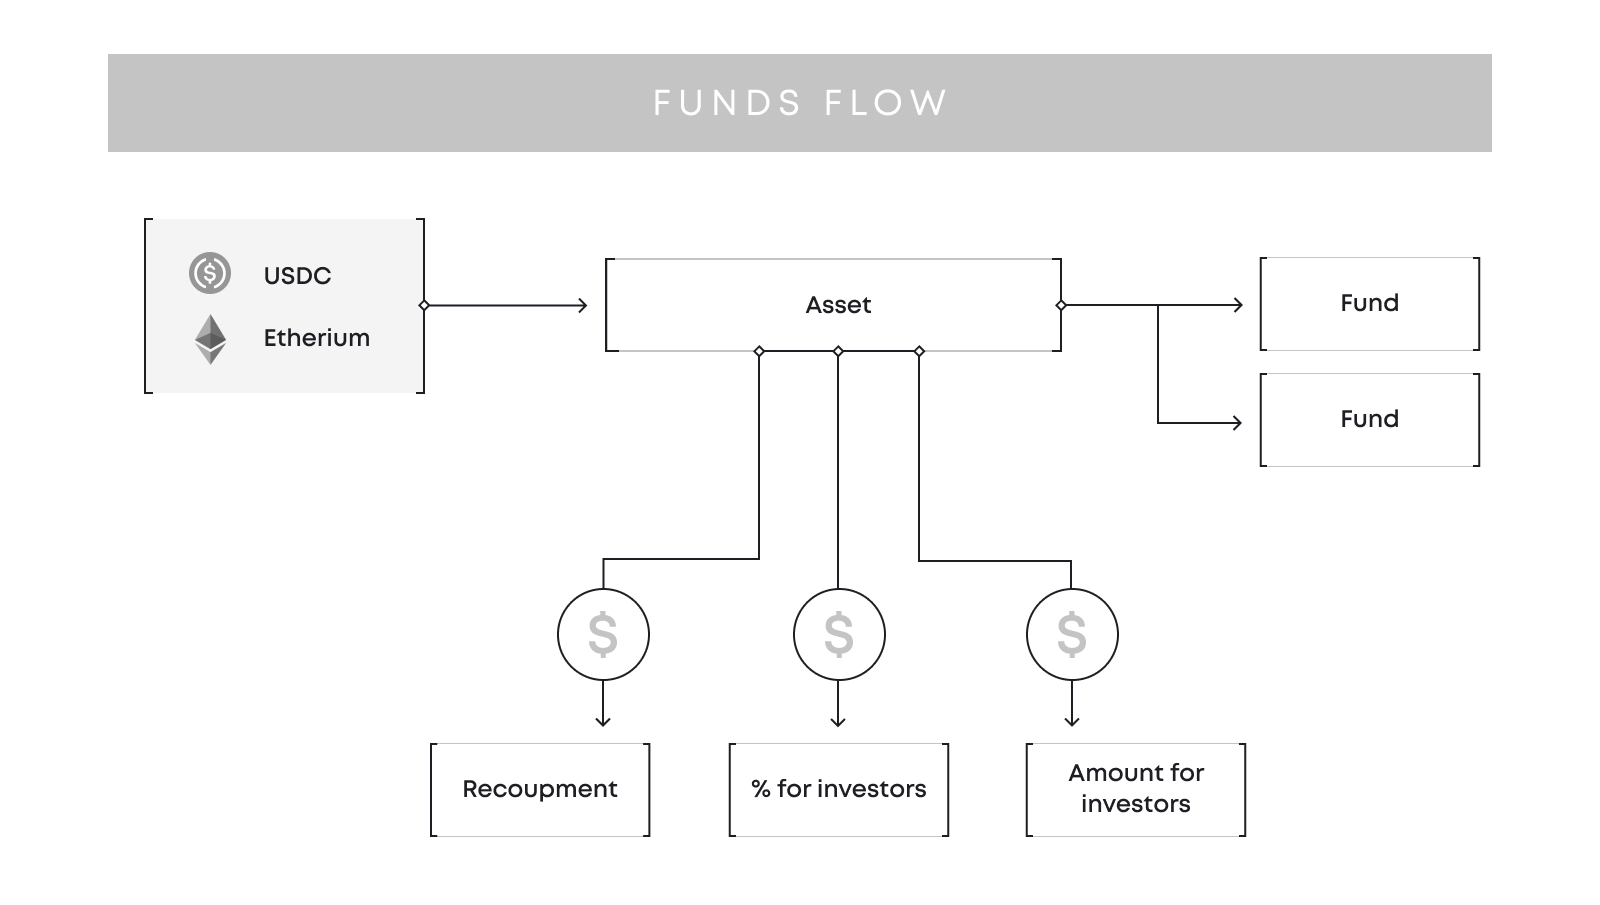 Breaker system for the funds flow